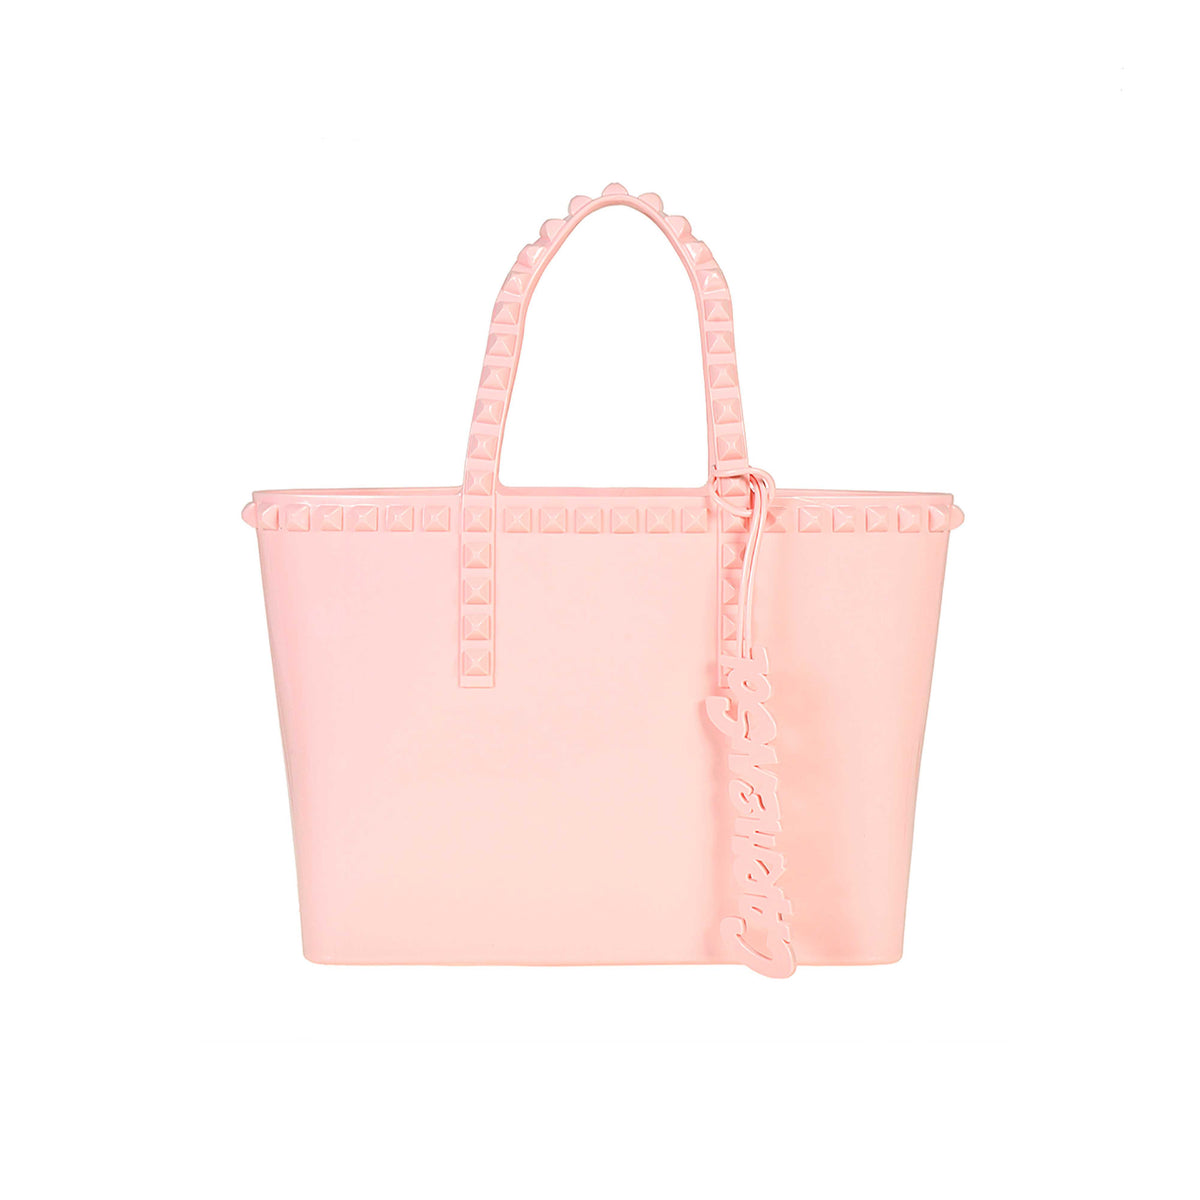 jelly beach bag in color baby pink with Carmen Sol charm